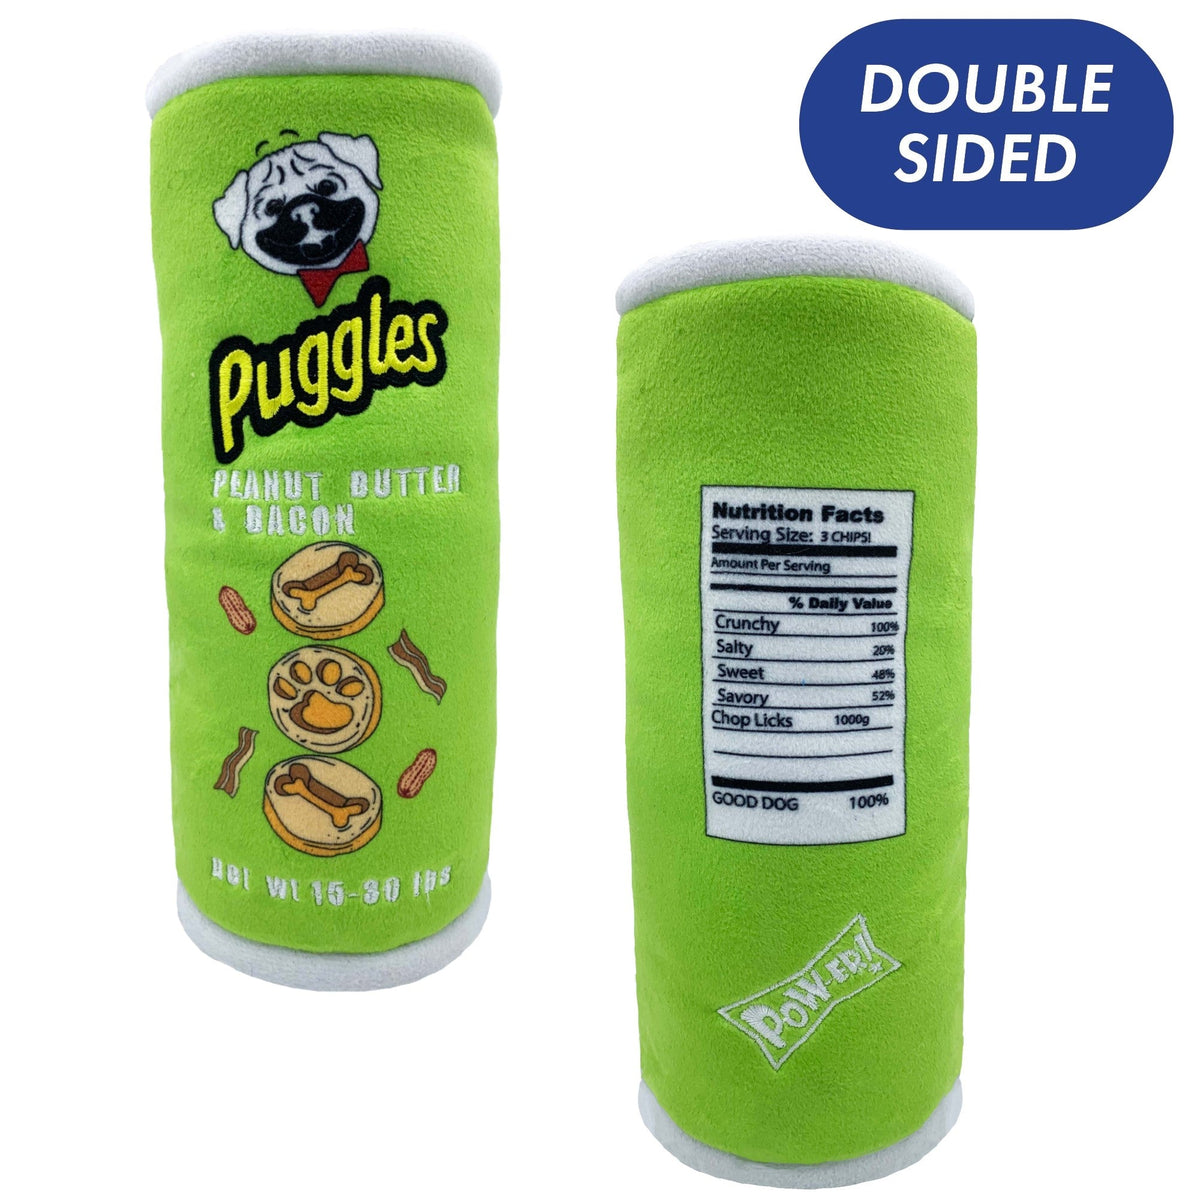 Puggles Can (Double Sided)